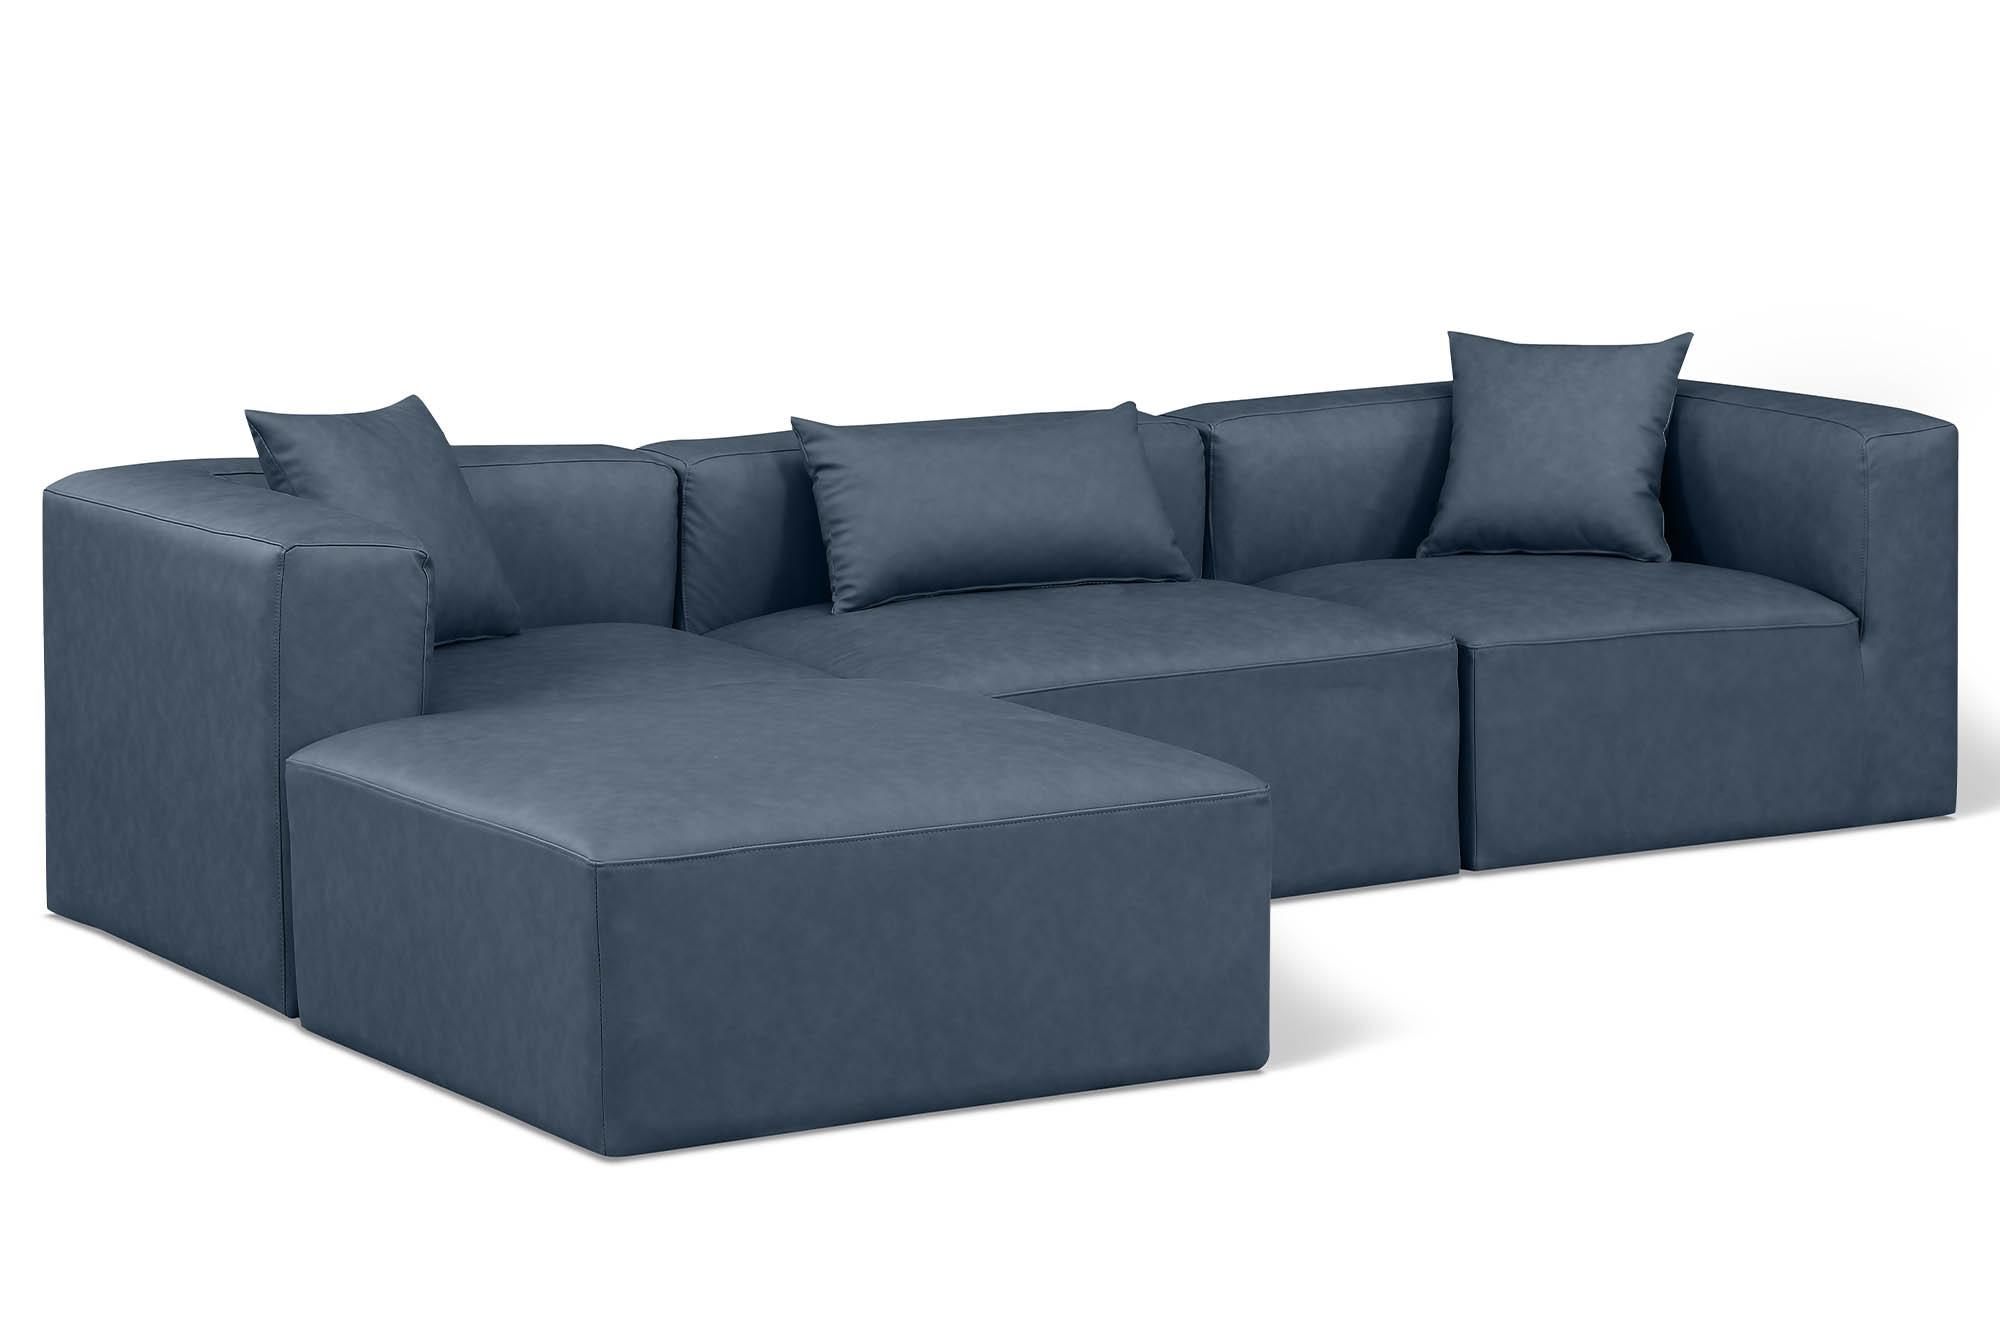 Contemporary, Modern Modular Sectional Sofa CUBE 668Navy-Sec4A 668Navy-Sec4A in Navy Faux Leather